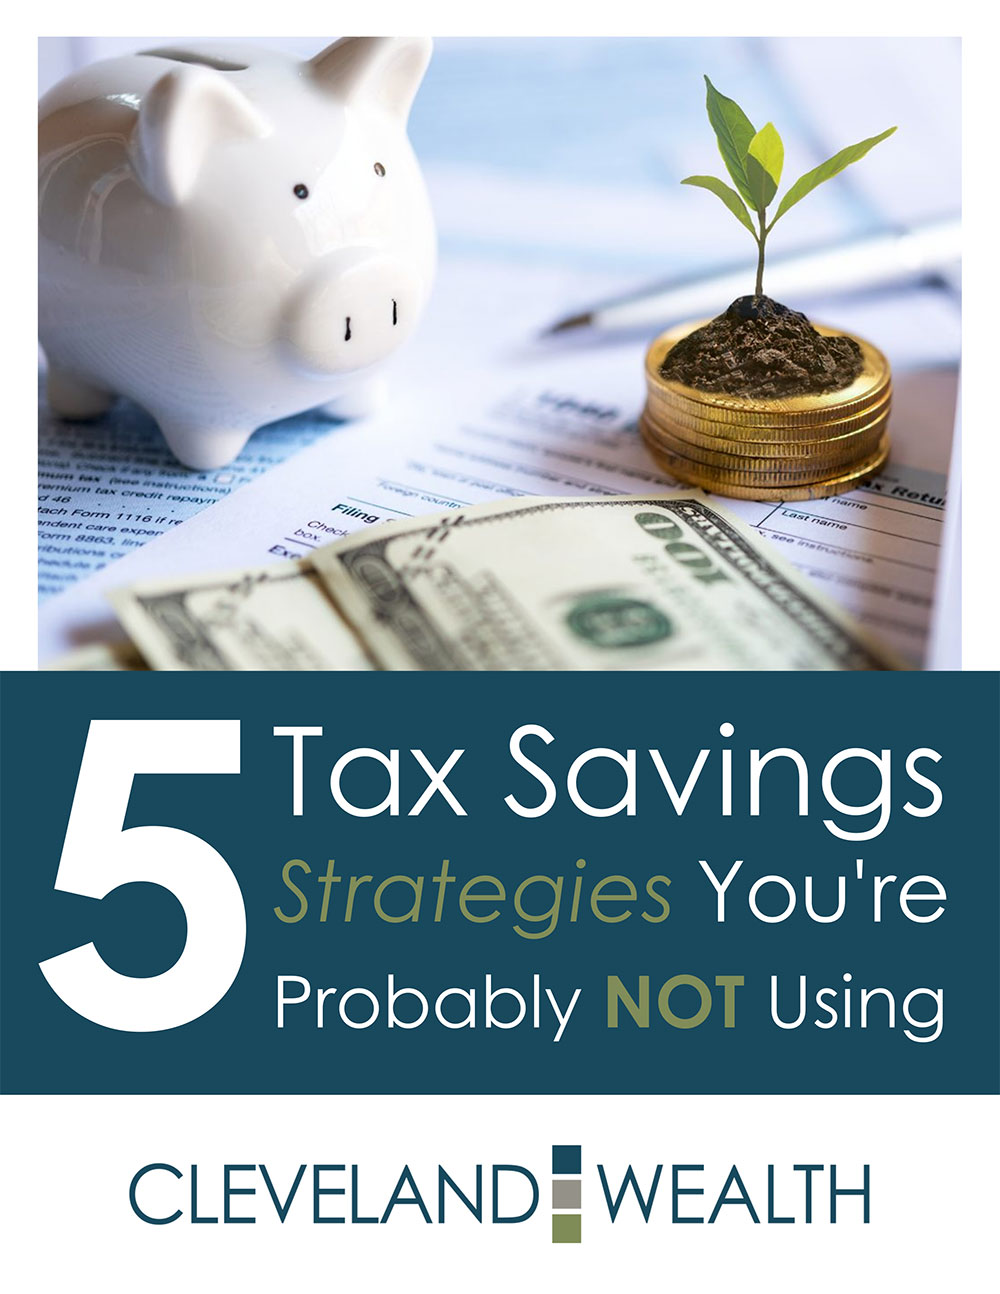 5 Tax Savings Strategies You're Probably Not Using, a Cleveland Wealth Whitepaper